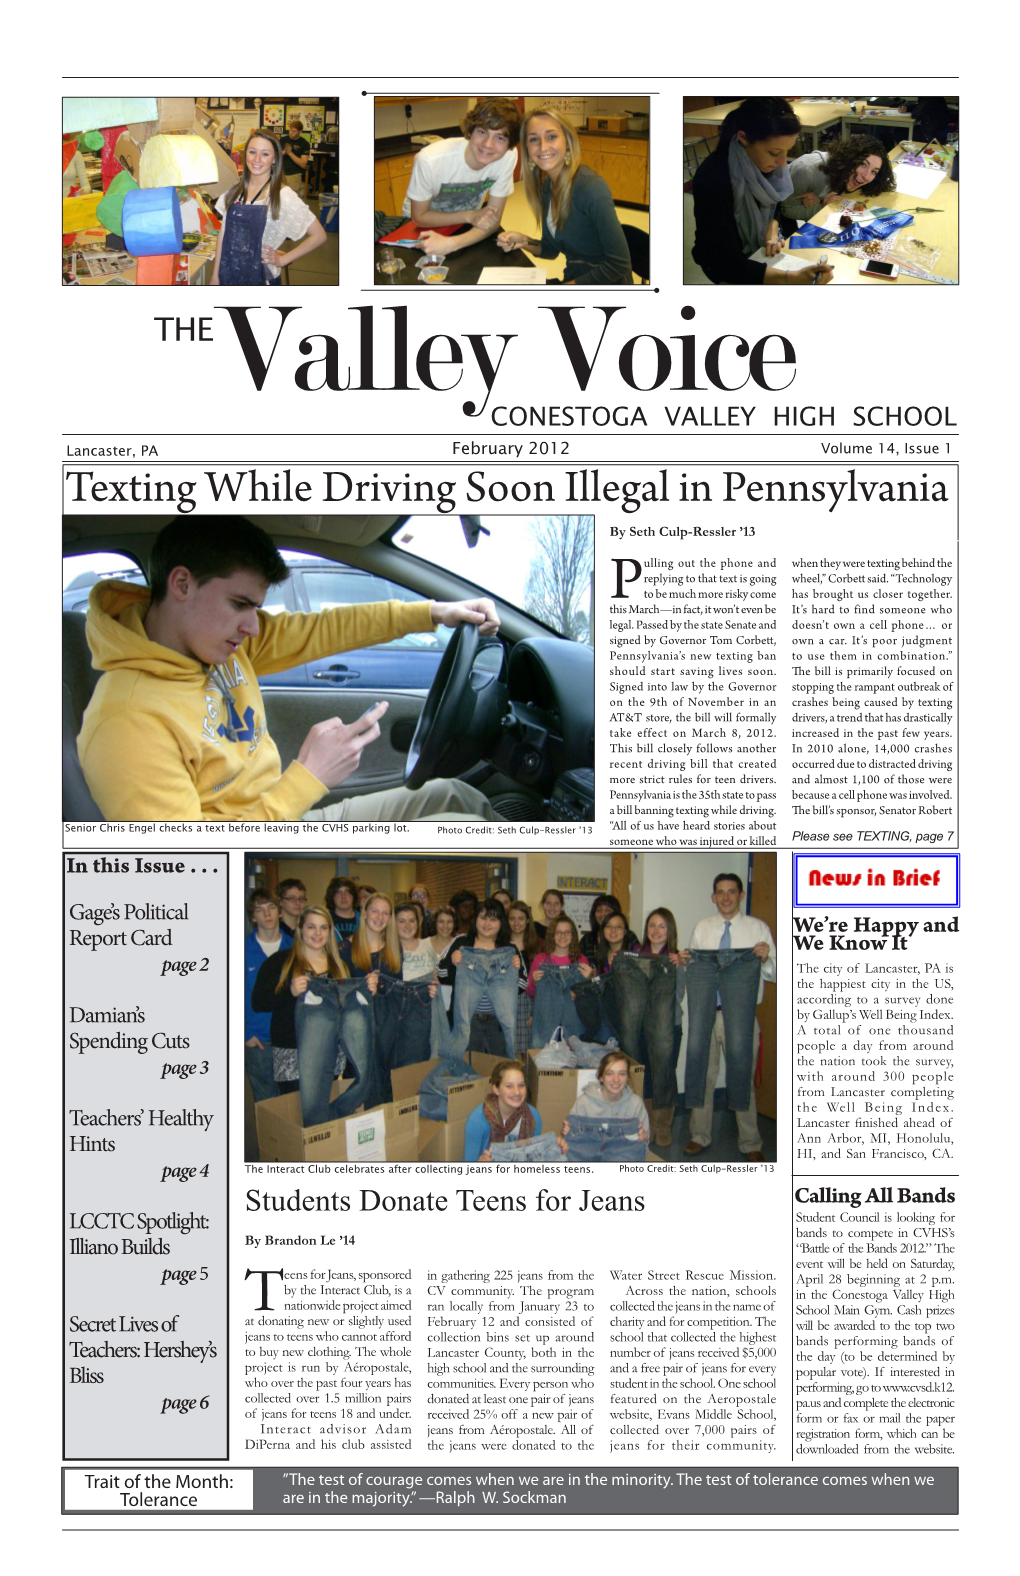 Texting While Driving Soon Illegal in Pennsylvania by Seth Culp-Ressler ’13